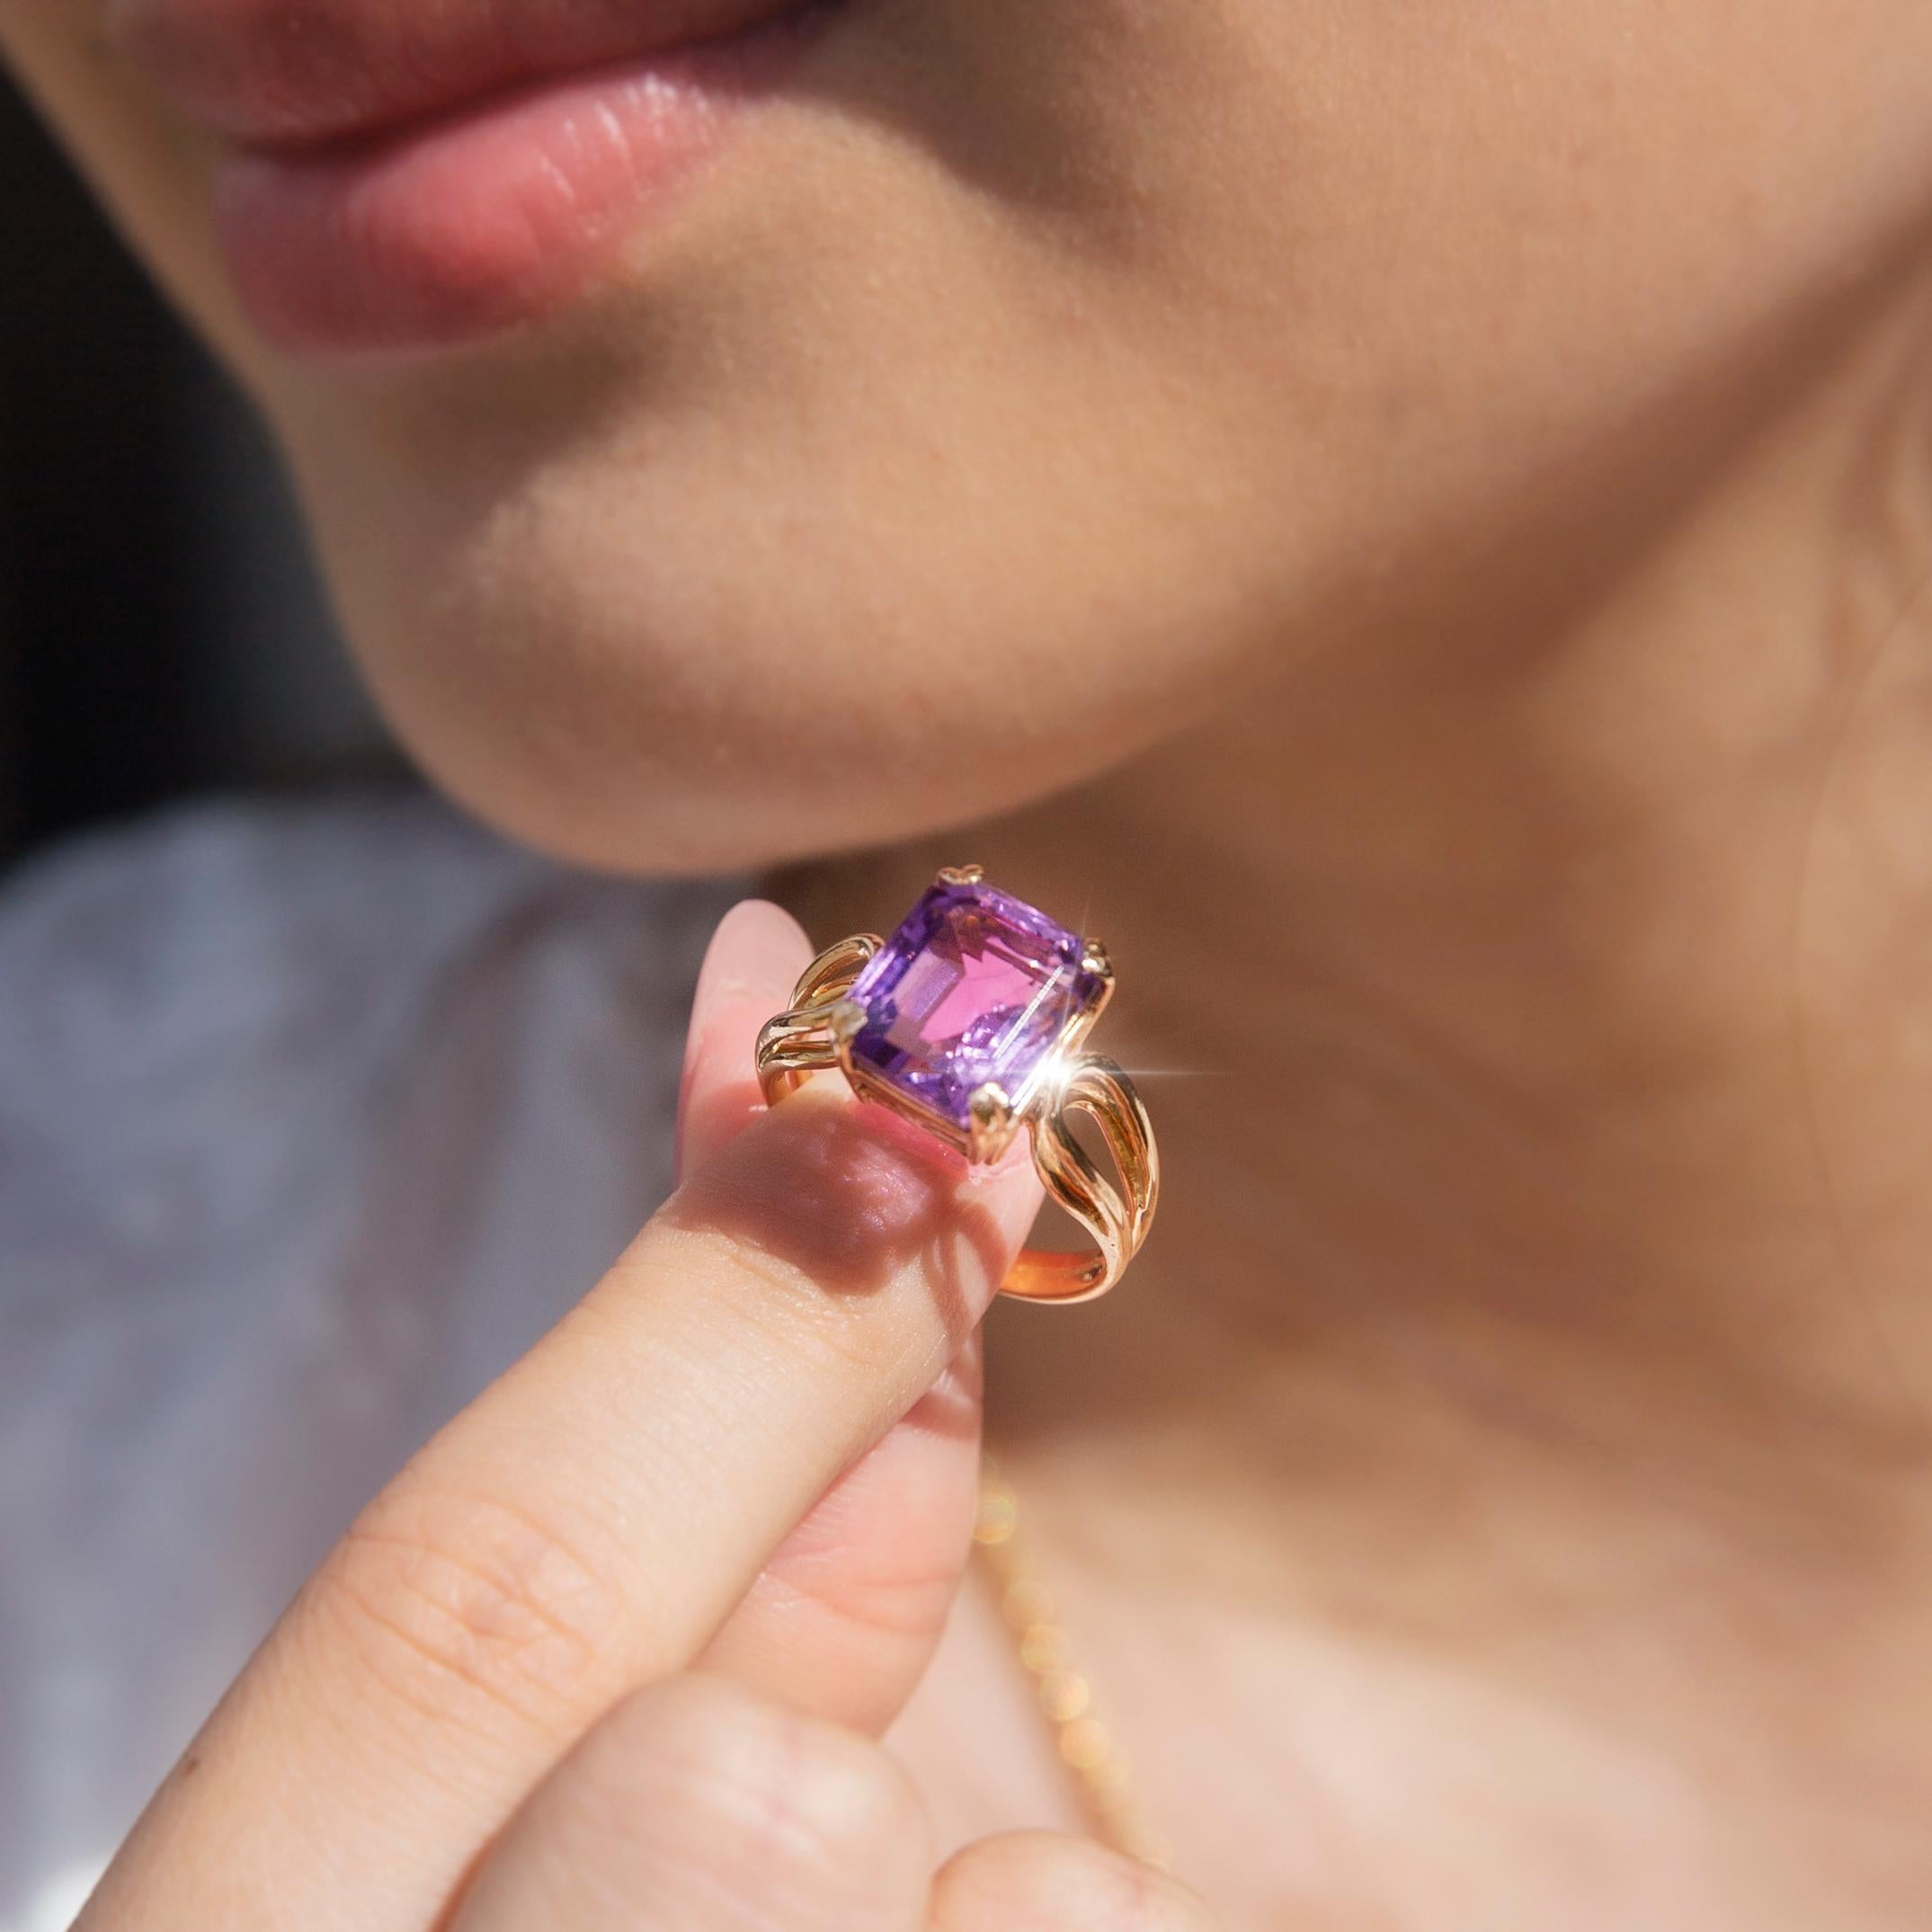 Forged in 18 carat gold, this darling vintage ring features a lovely 4.91 carat faceted emerald cut amethyst set atop elegant wire frame shoulders. This lovely vintage piece has been named The Laia Ring. Her captivating amethyst is seated just high